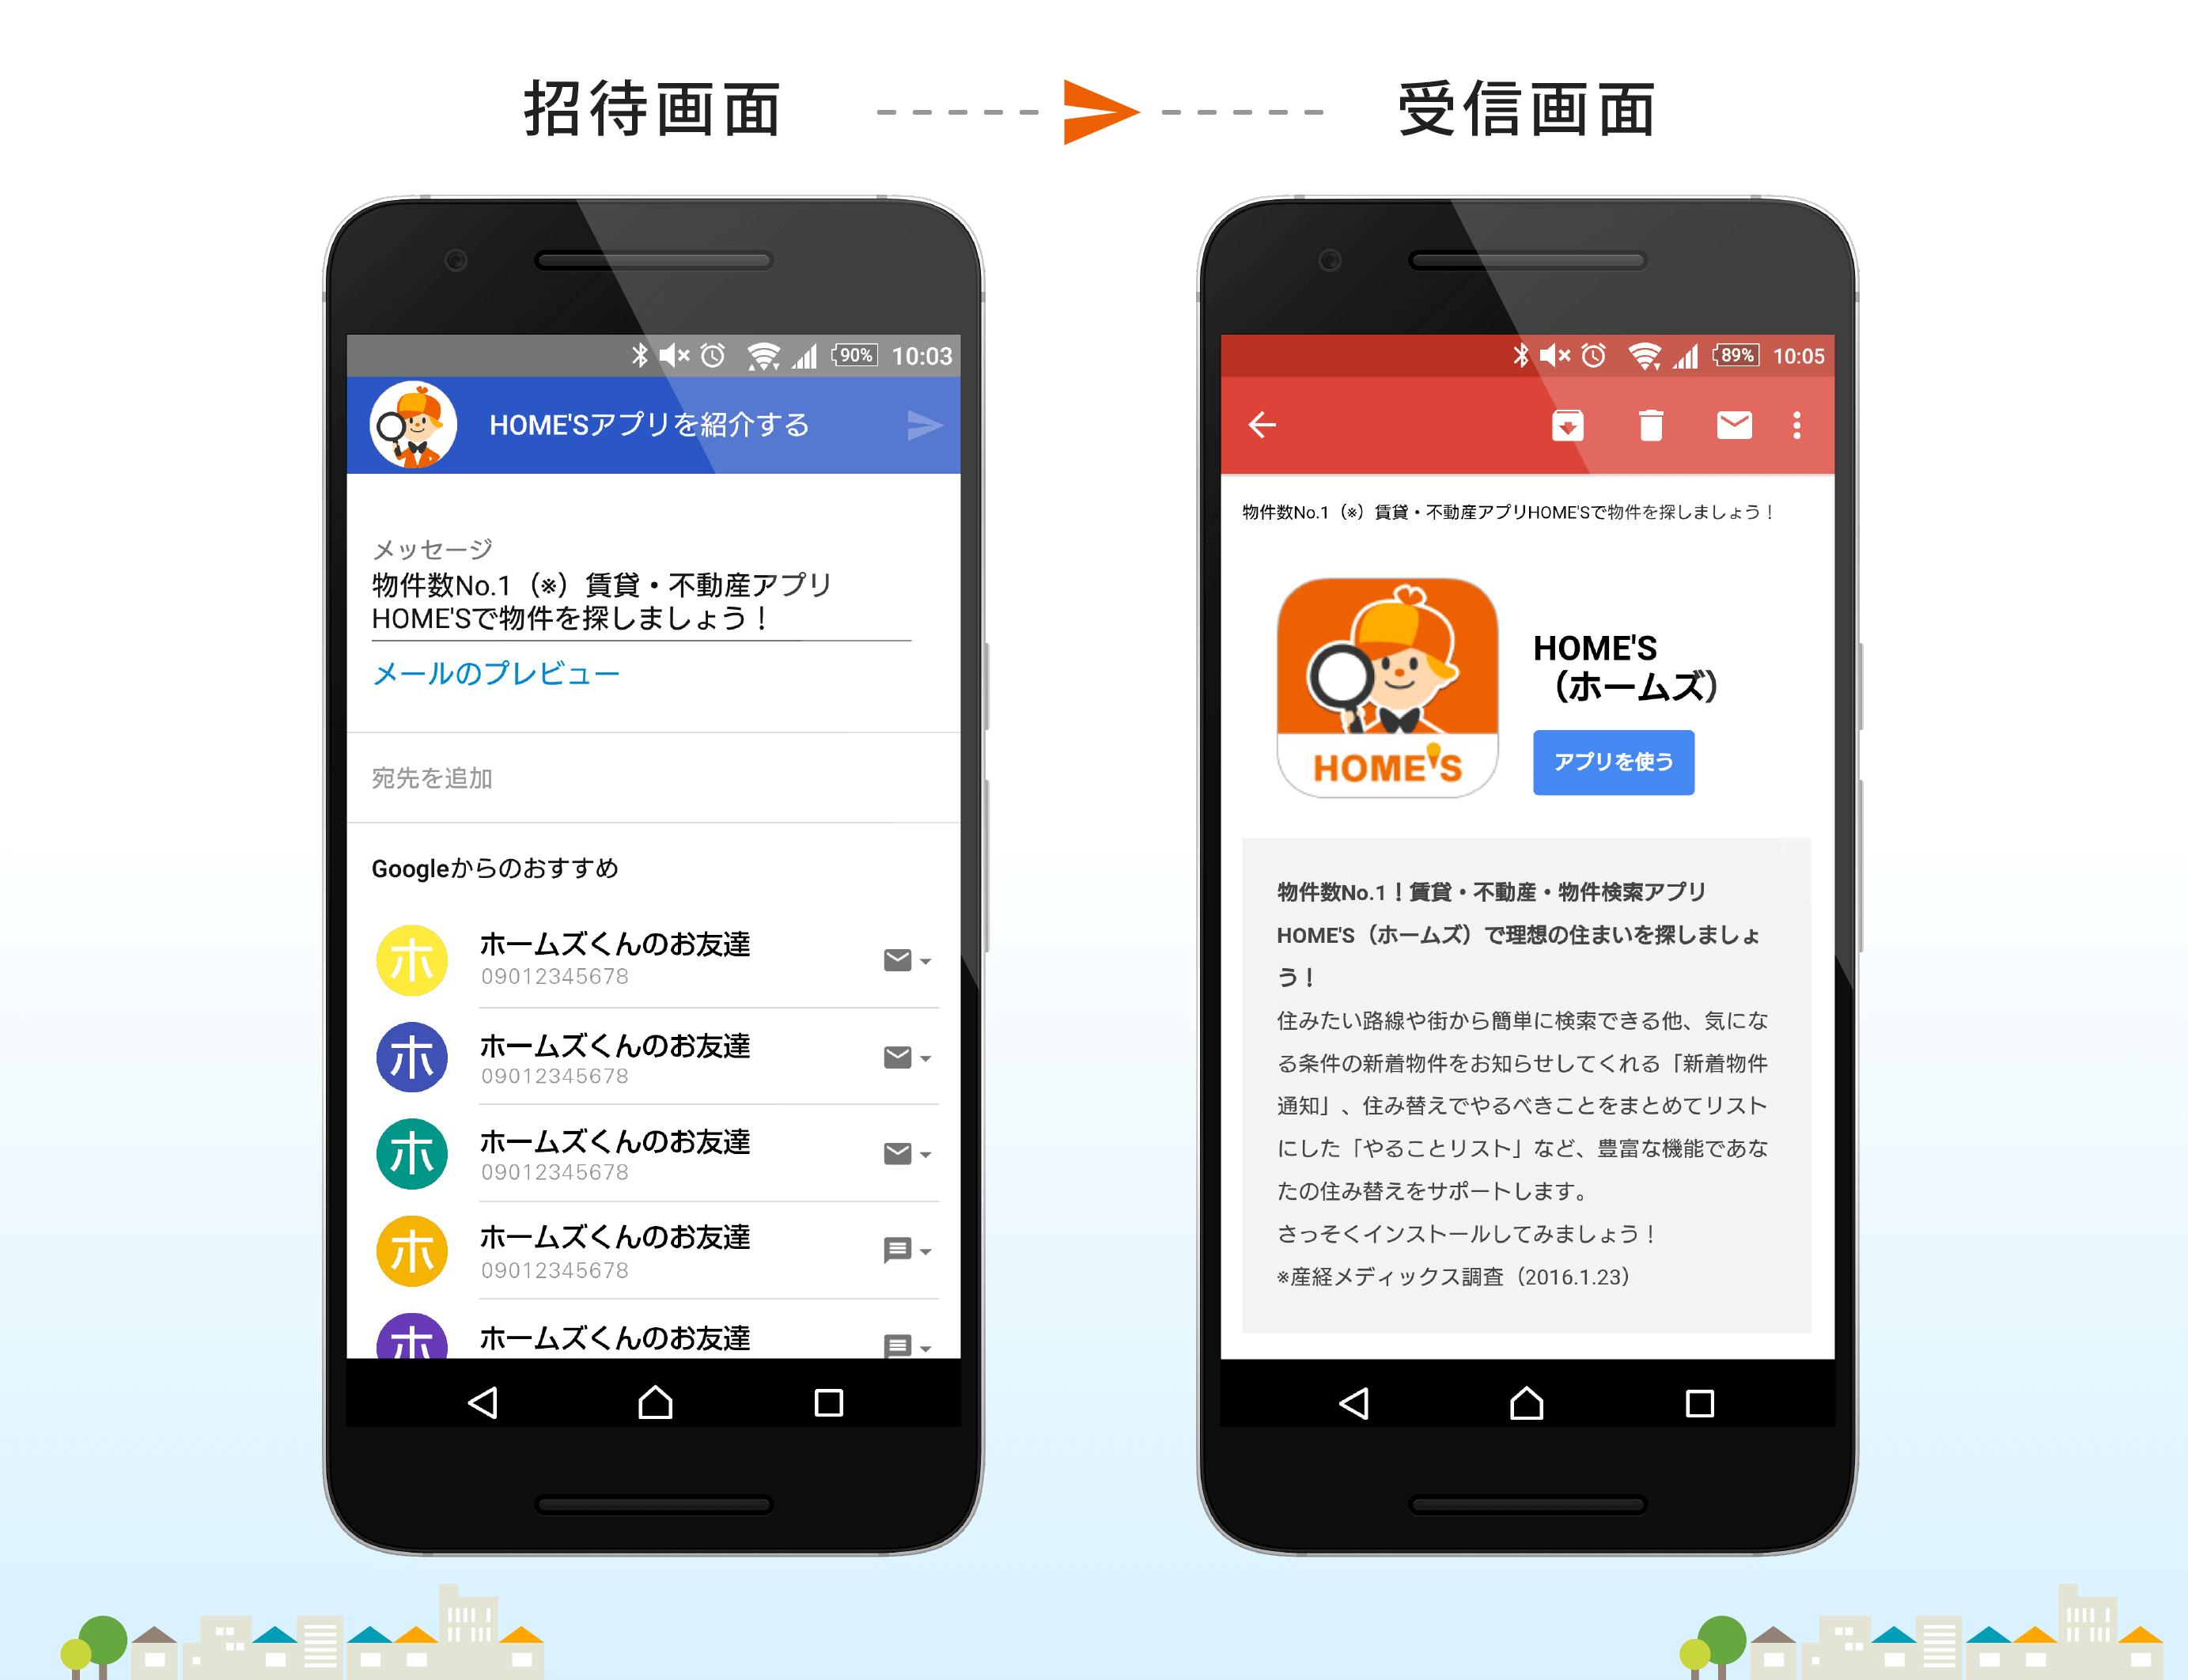 HOME’S Android アプリ「App Invites」利用イメージ